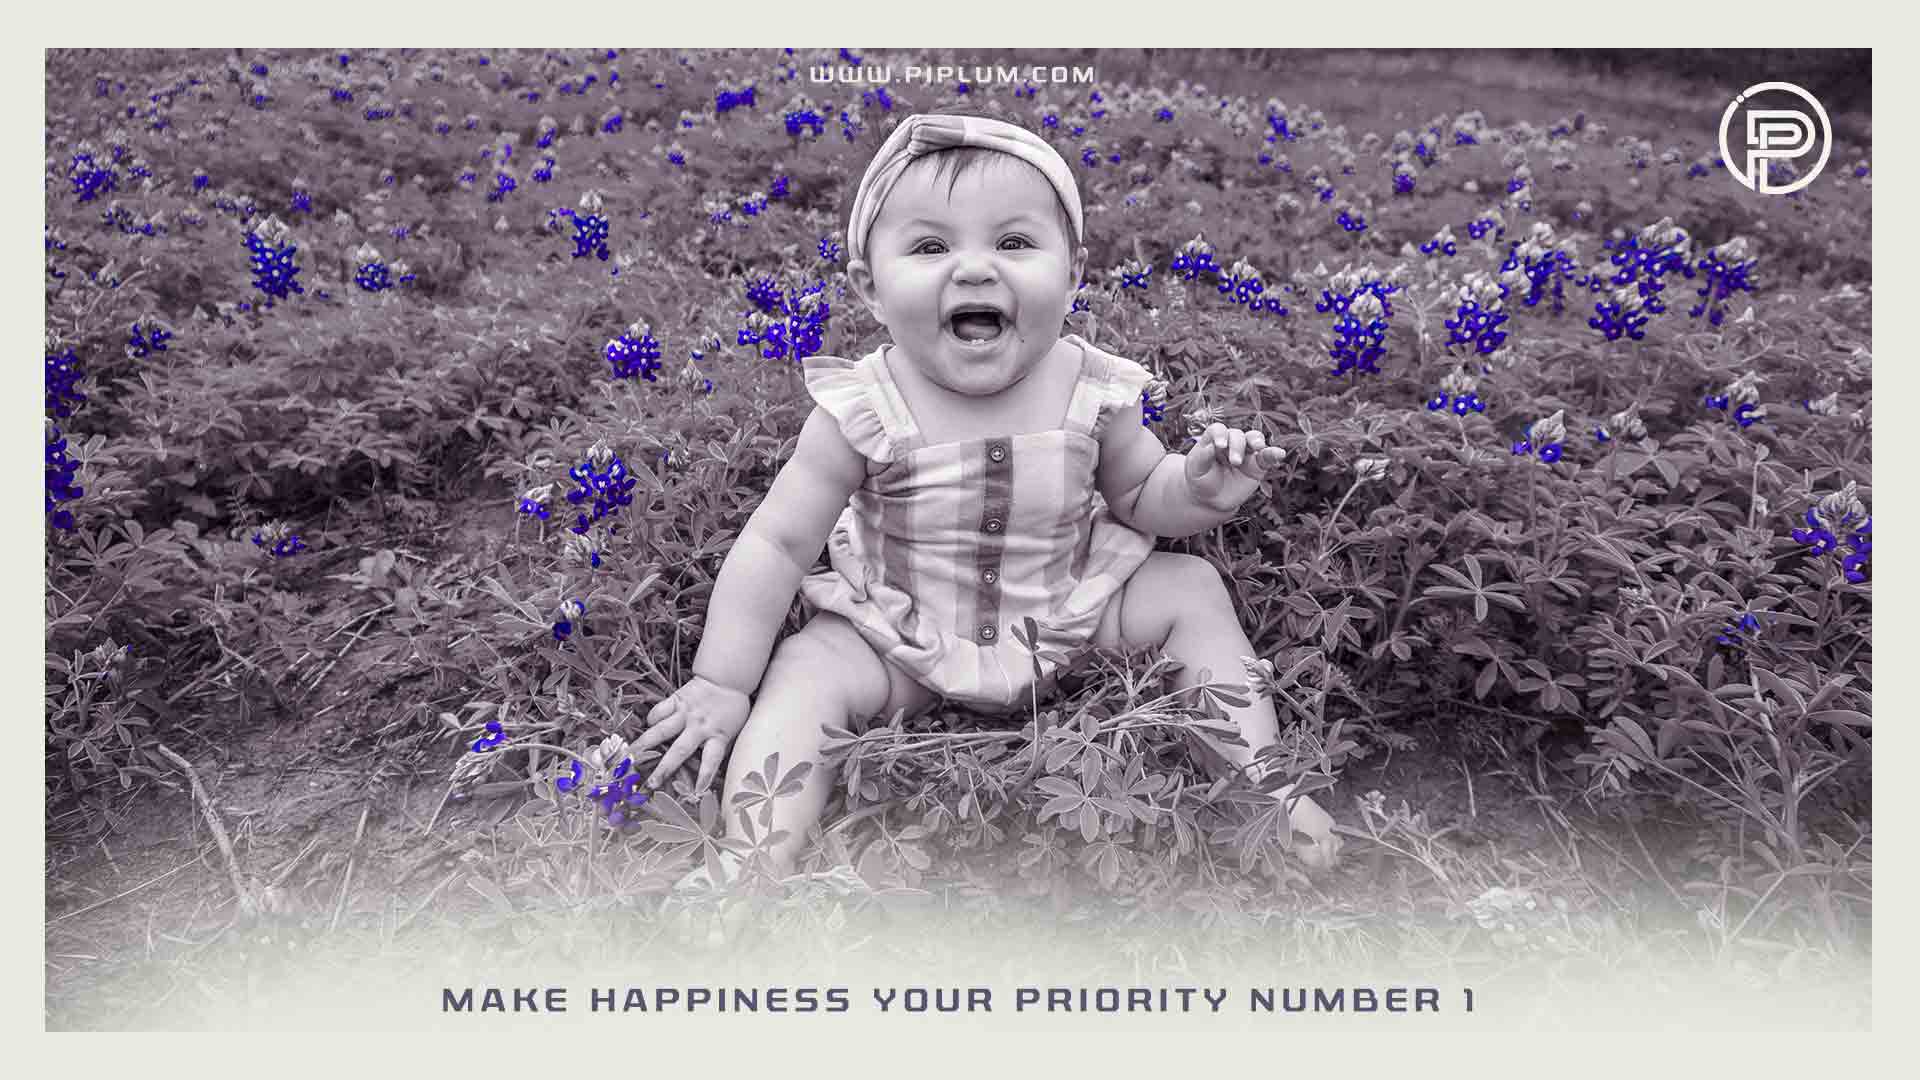 Make-happiness-your-priority-number-1-inspirational-quote